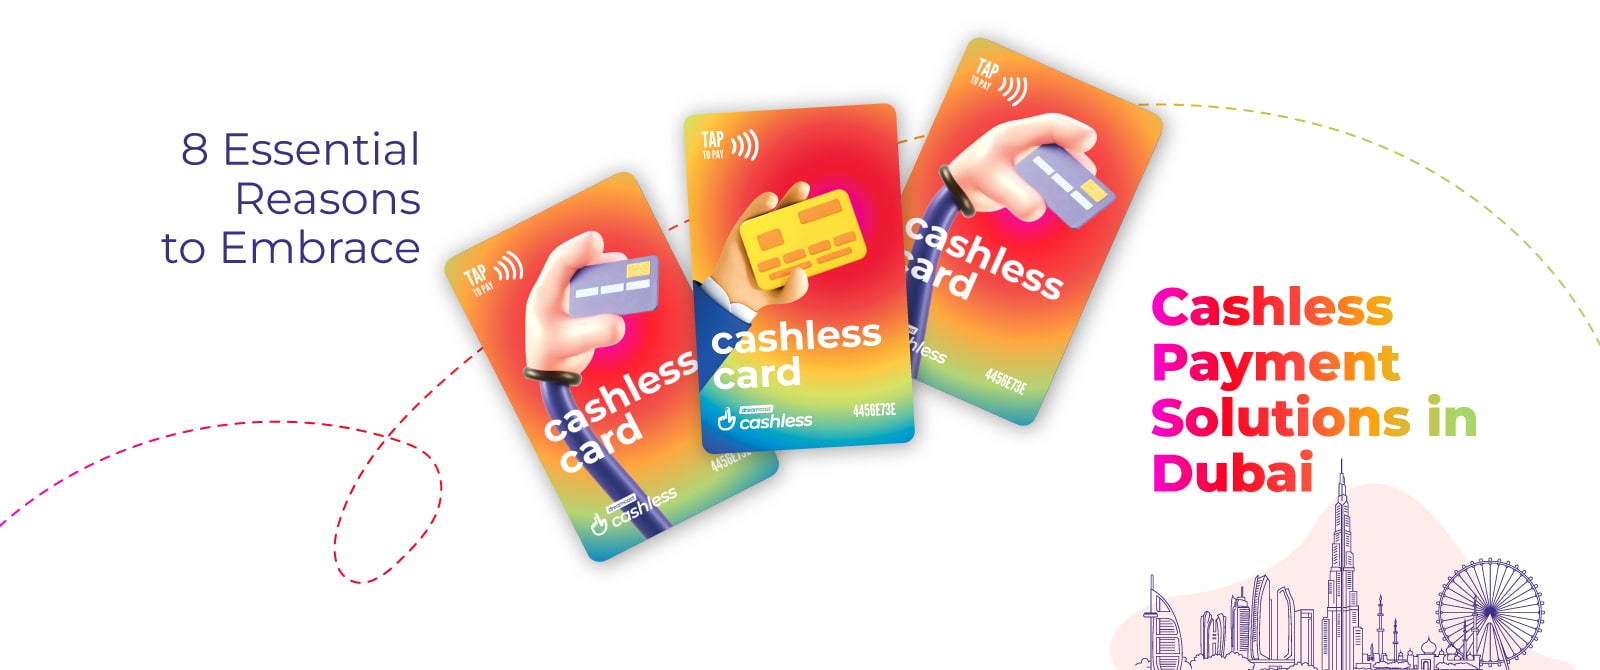 8 Essential Reasons to Embrace Cashless Payment Solutions in Dubai